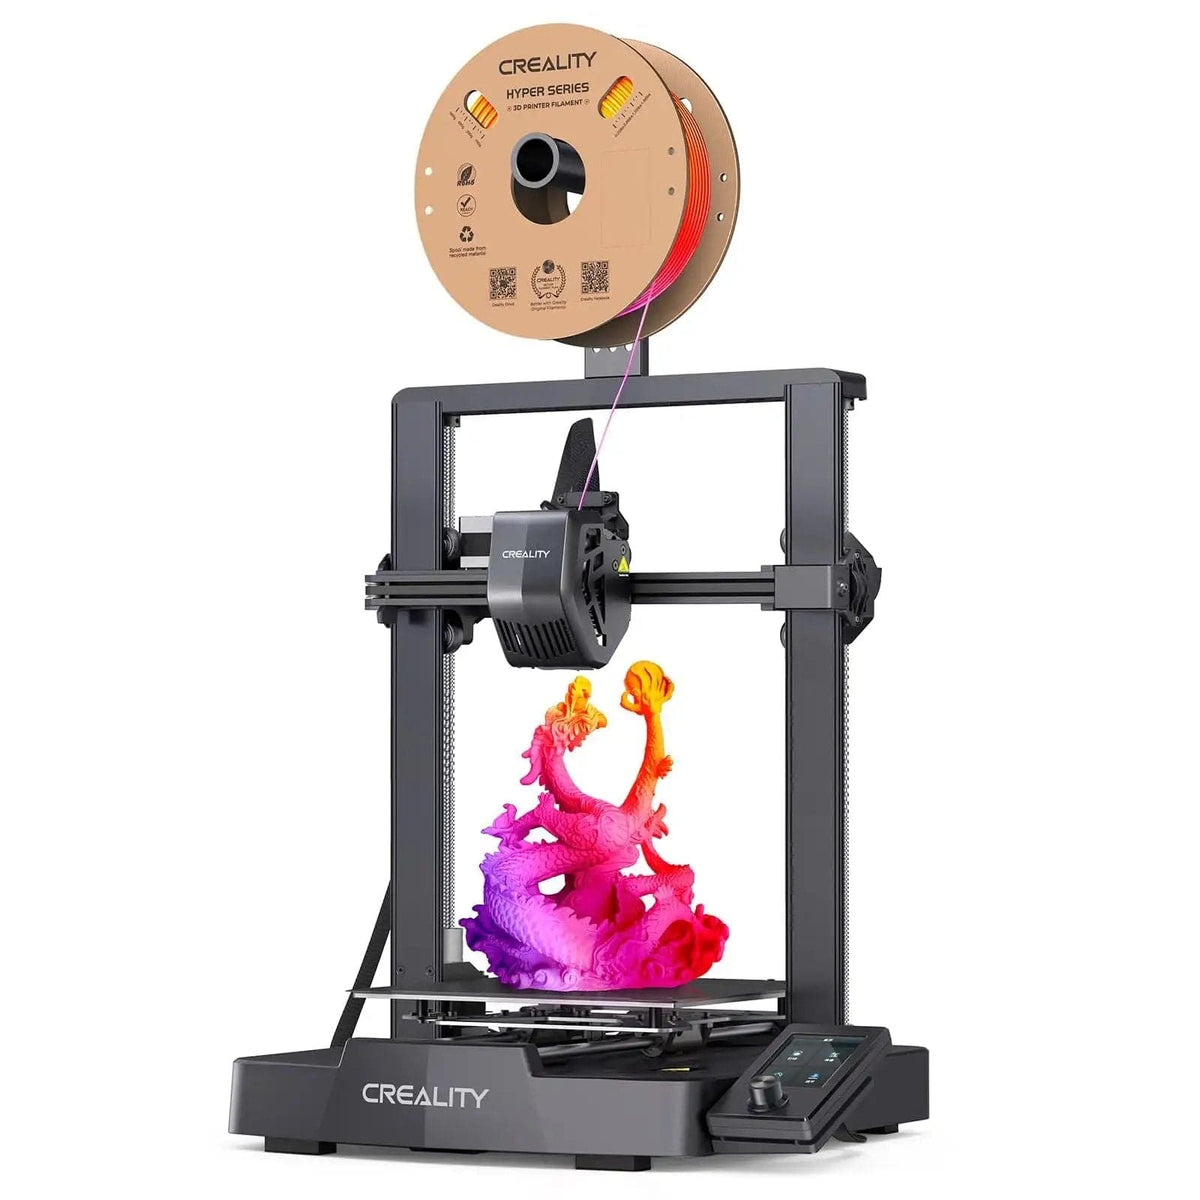 Creality Ender 3 V3 SE 3D Printer, 250mm/s Fast Printing 3D PrintersFeatures:

【Ship From Amazon FBA Warehouse】Same shipping service with Amazon. Enjoy reliable performance and fast shipping with the Amazon FBA Warehouse.


【3D PrintCreality Ender 3 V3 SE 3D Printer, 250mm/3D Printer